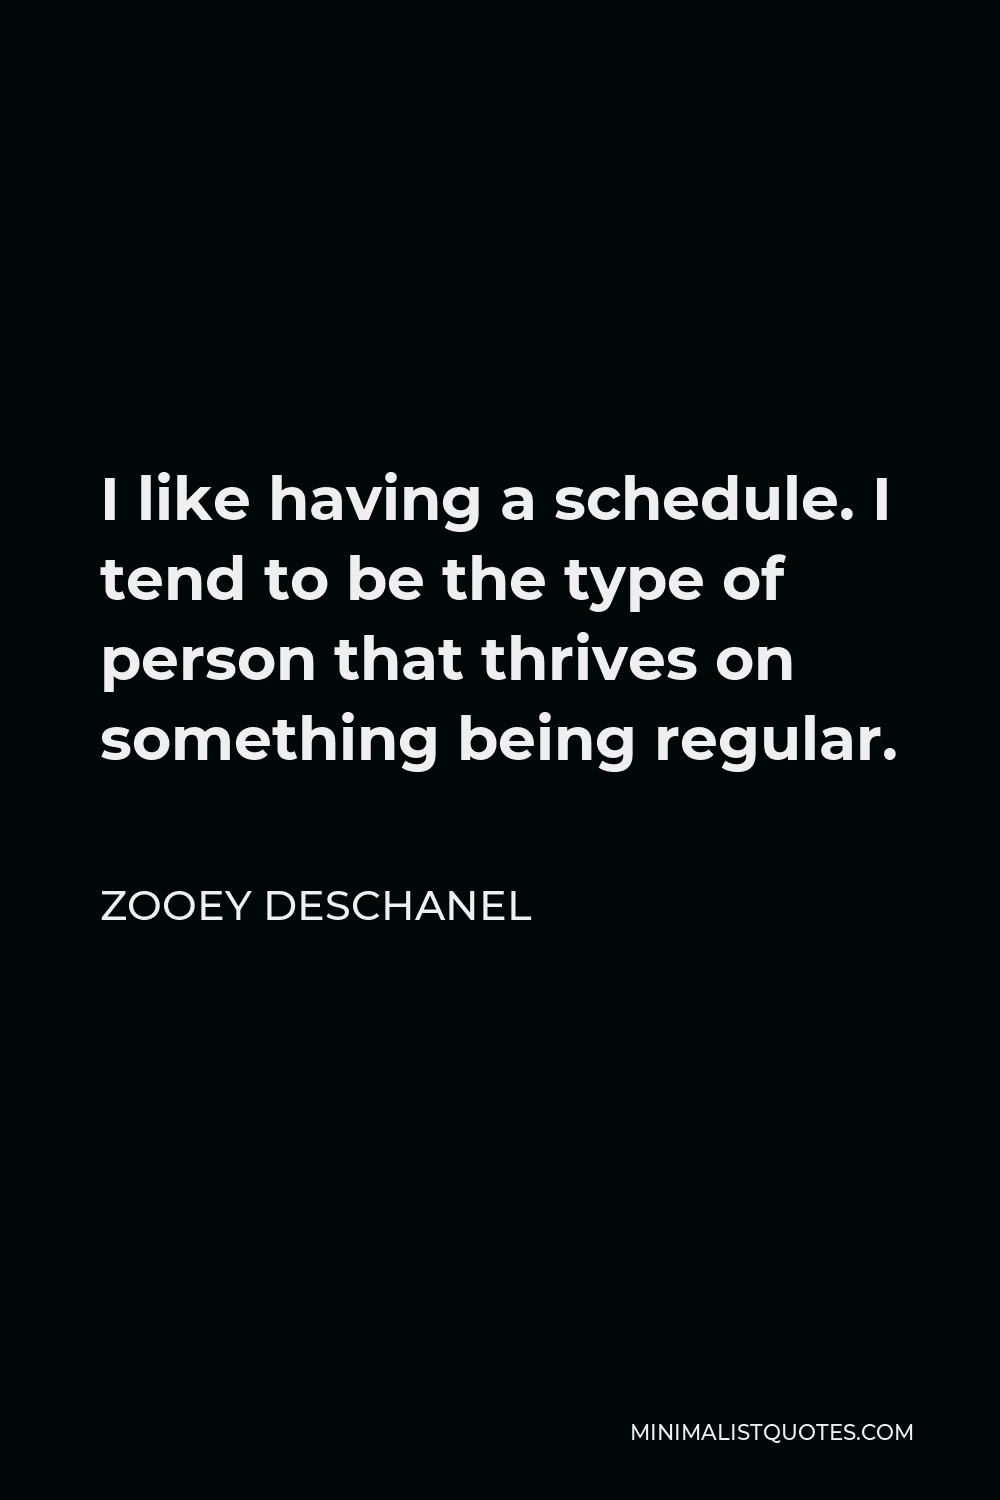 Zooey Deschanel Quote - I like having a schedule. I tend to be the type of person that thrives on something being regular.